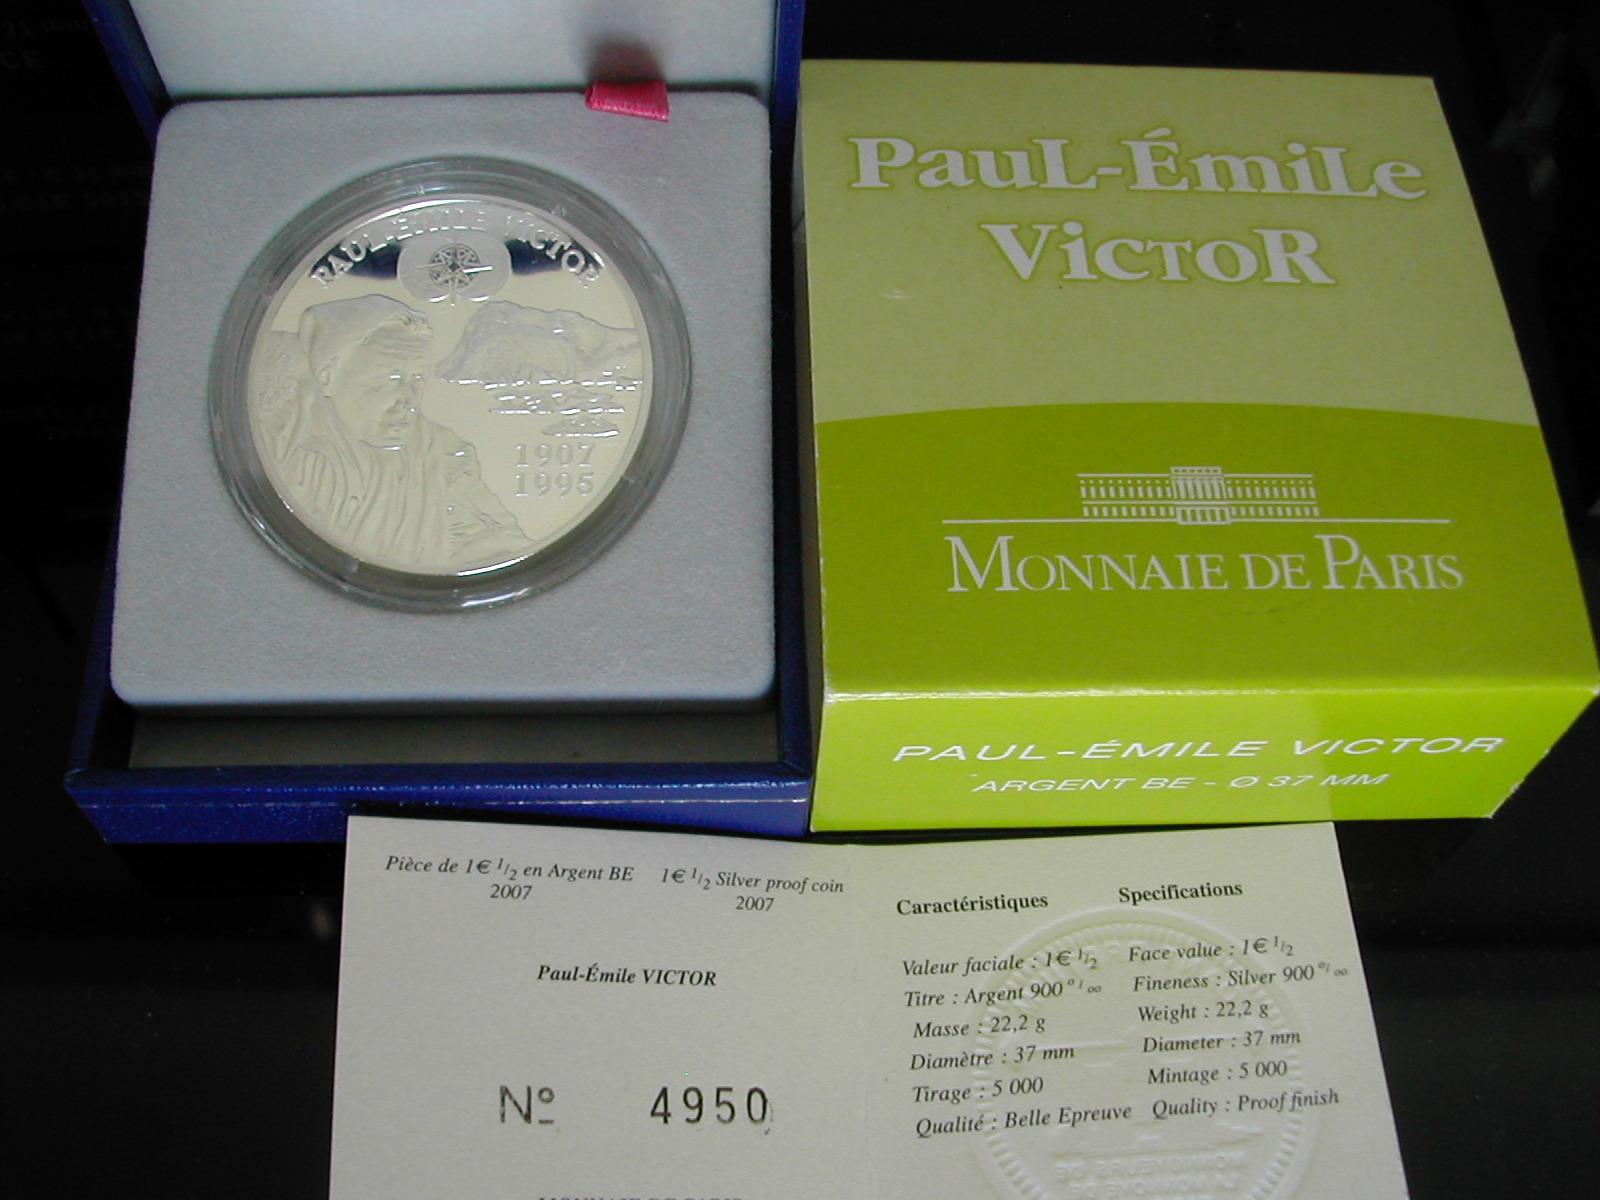 1 5 france 2007 paul emile victor be a